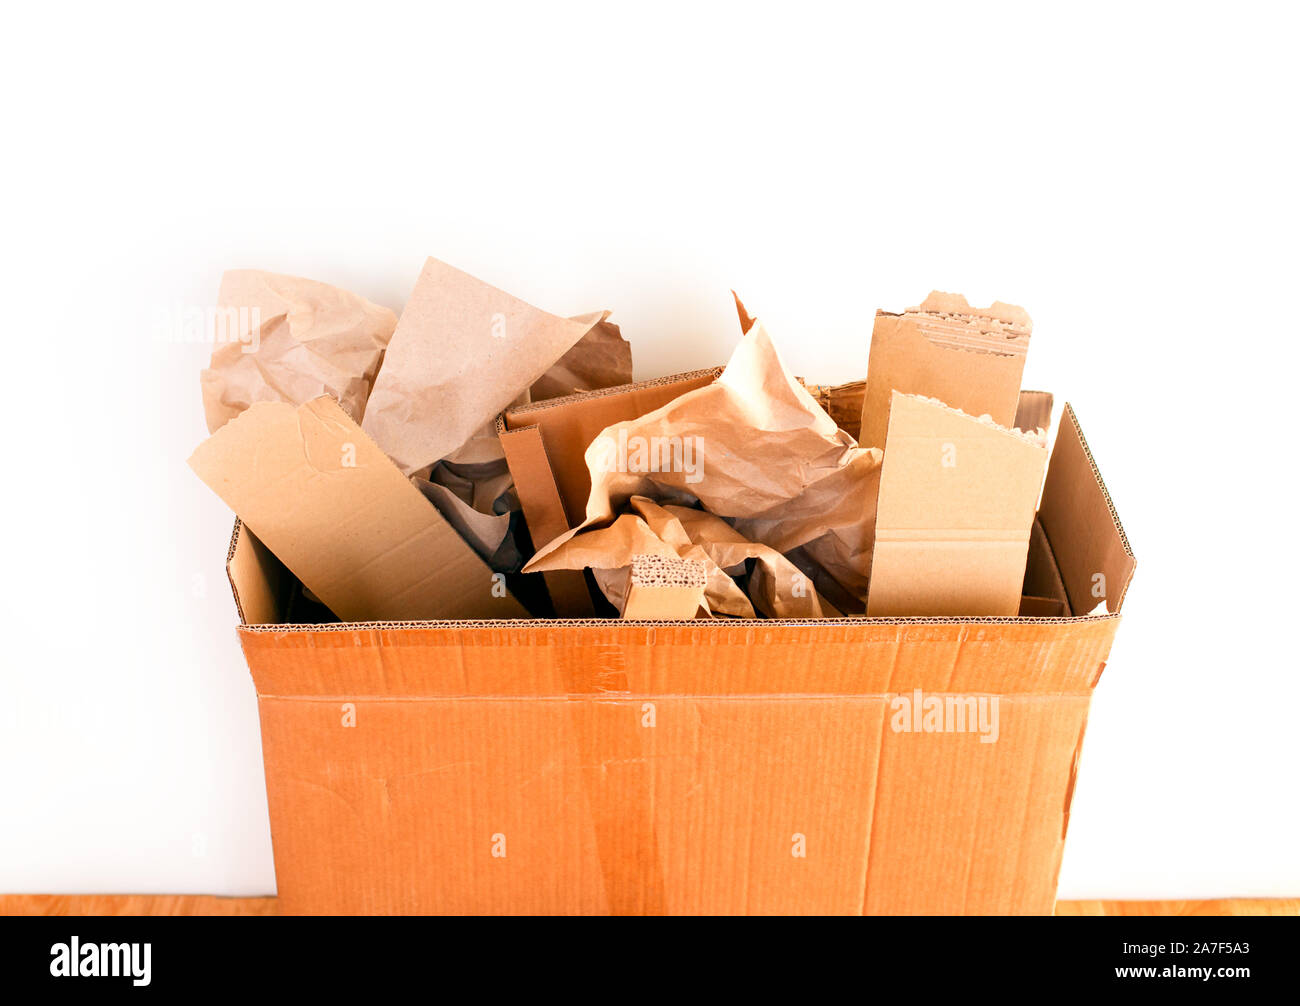 Cardboard box with crumpled paper and cardboard pieces against white wall. Close-up. Stock Photo